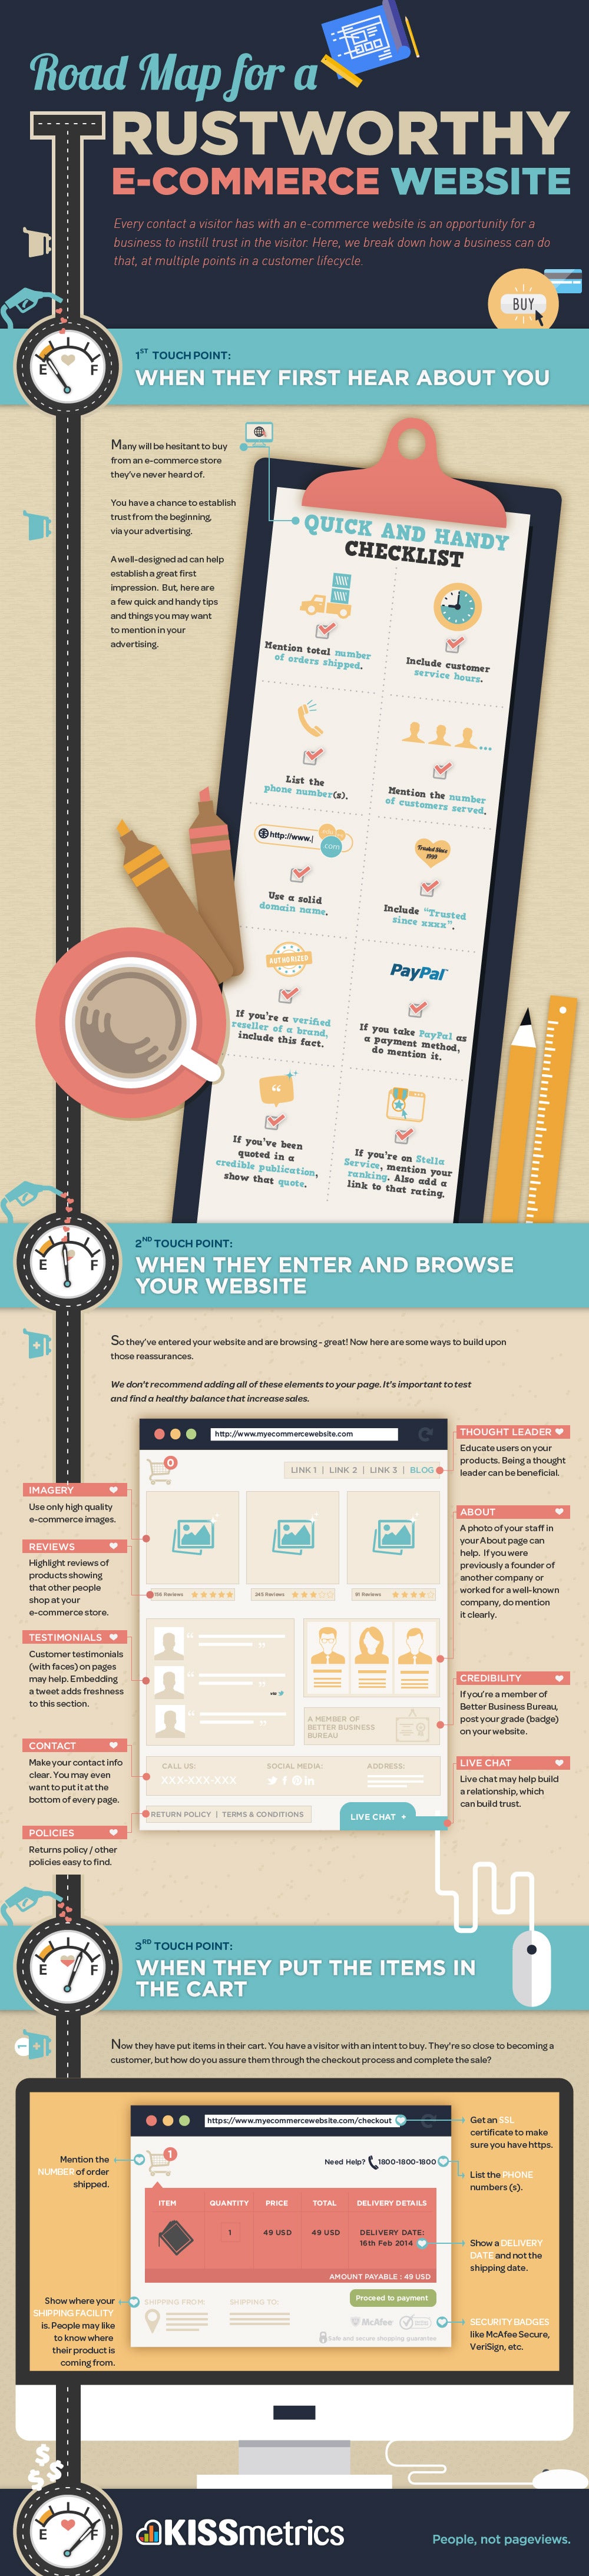 How to Get Customers to Trust Your Ecommerce Business (Infographic)